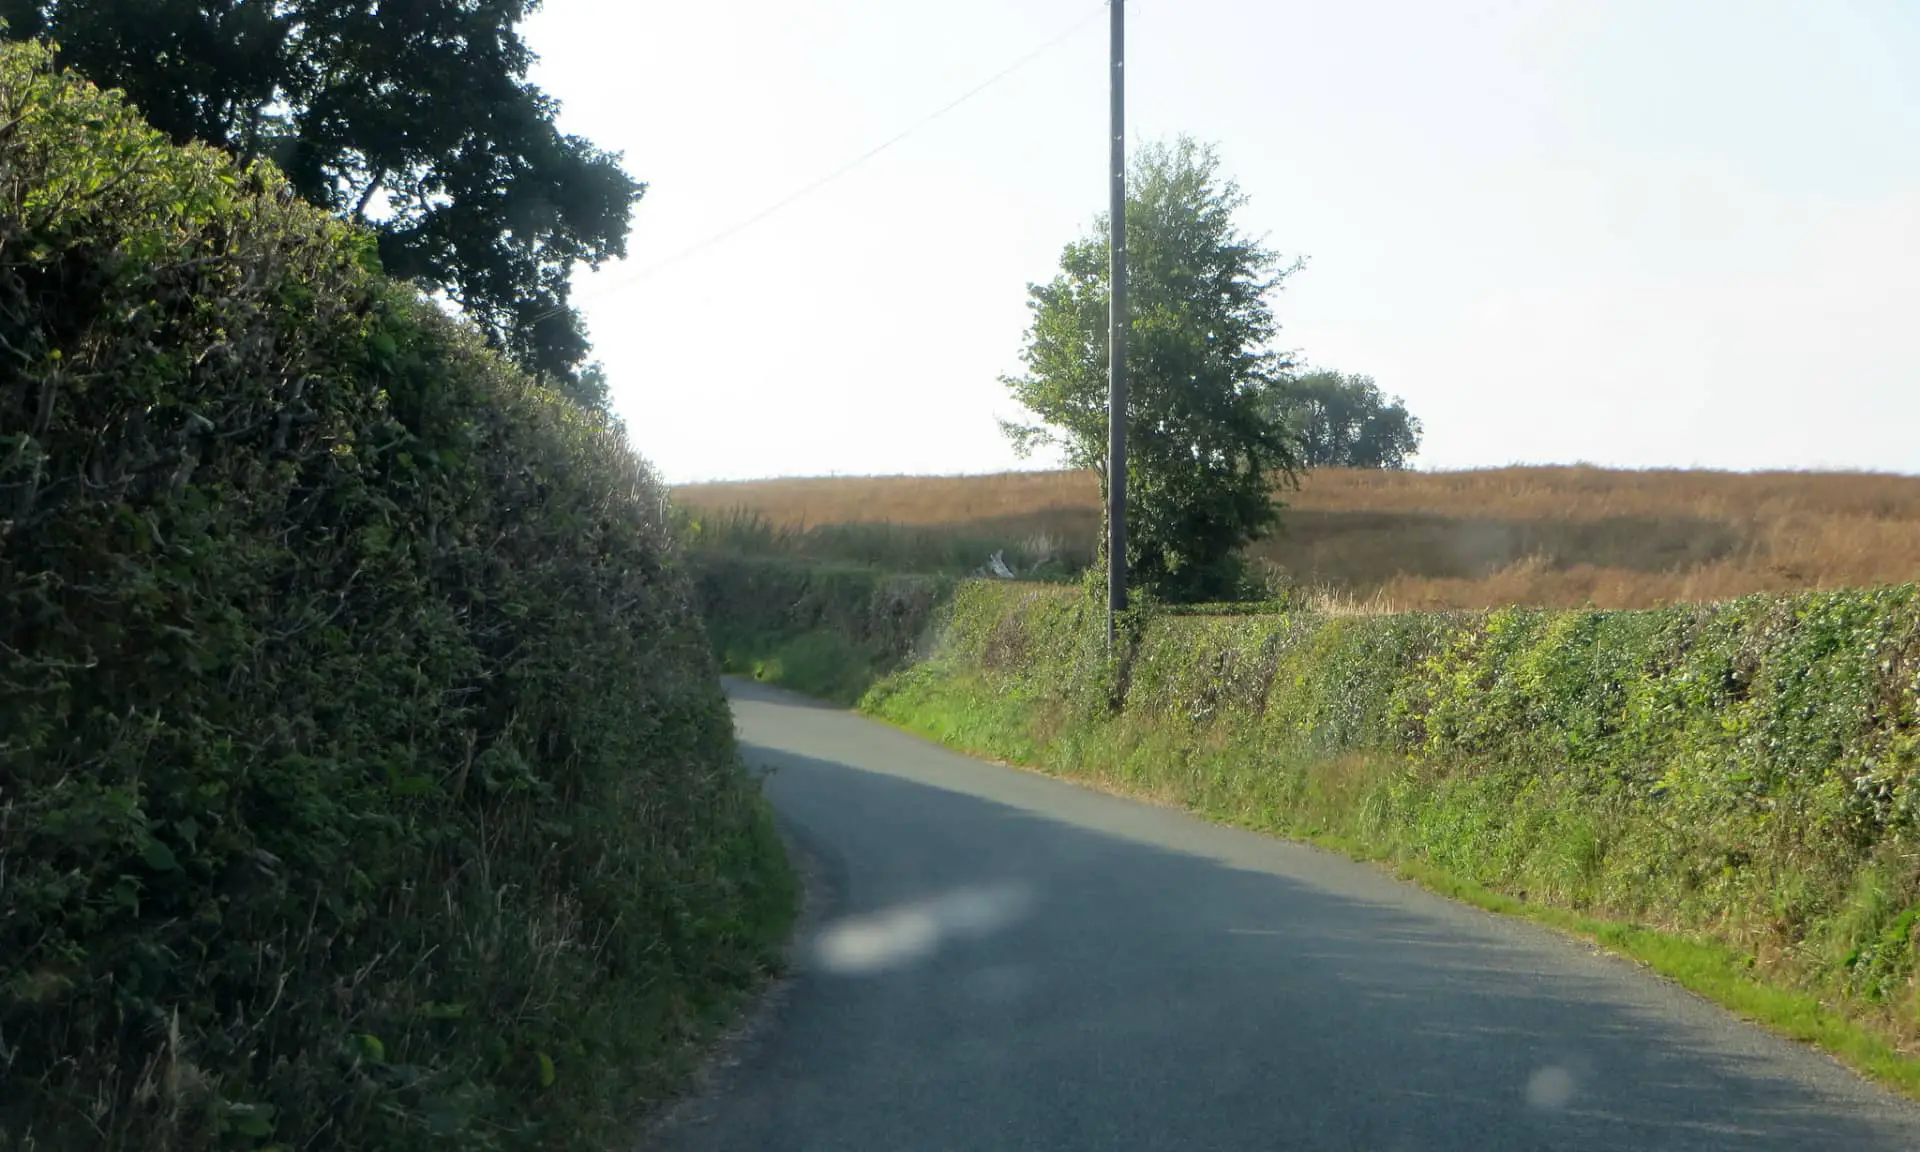 Hedgerows and road